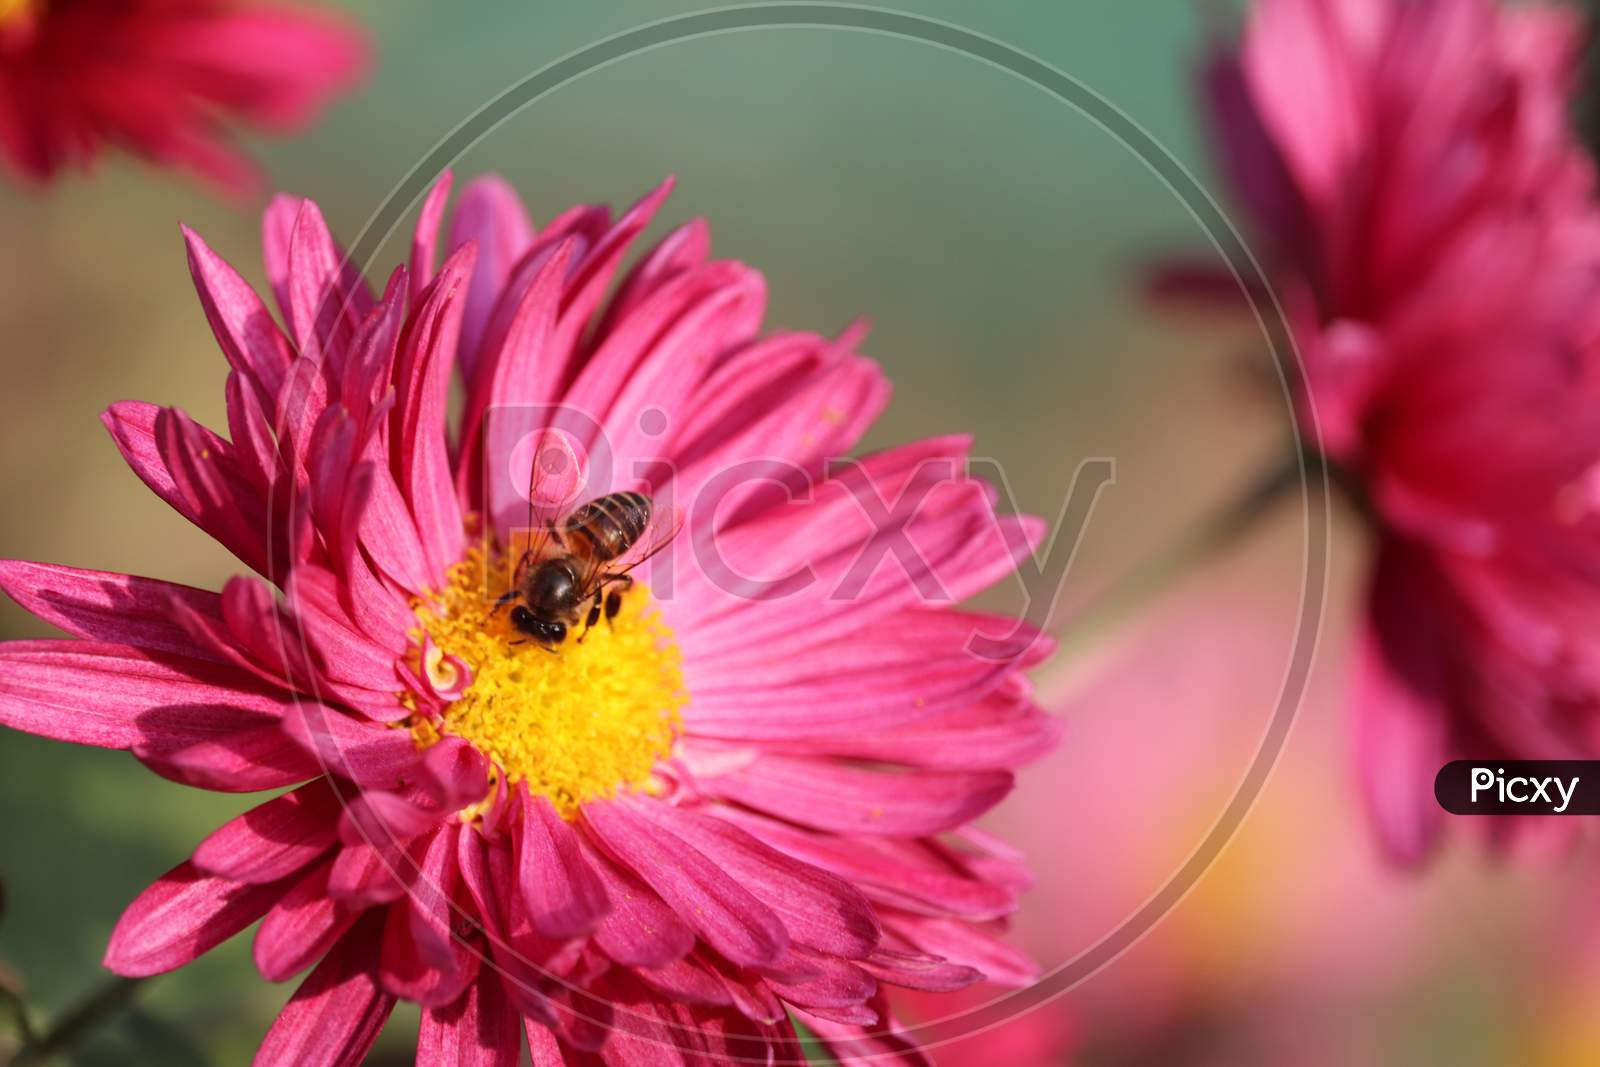 Shiny And Pink Aster Flower (Callistephus Chinensis) In The Garden With Blurred Background Of Green Leaves Honey Bees Eating Flower